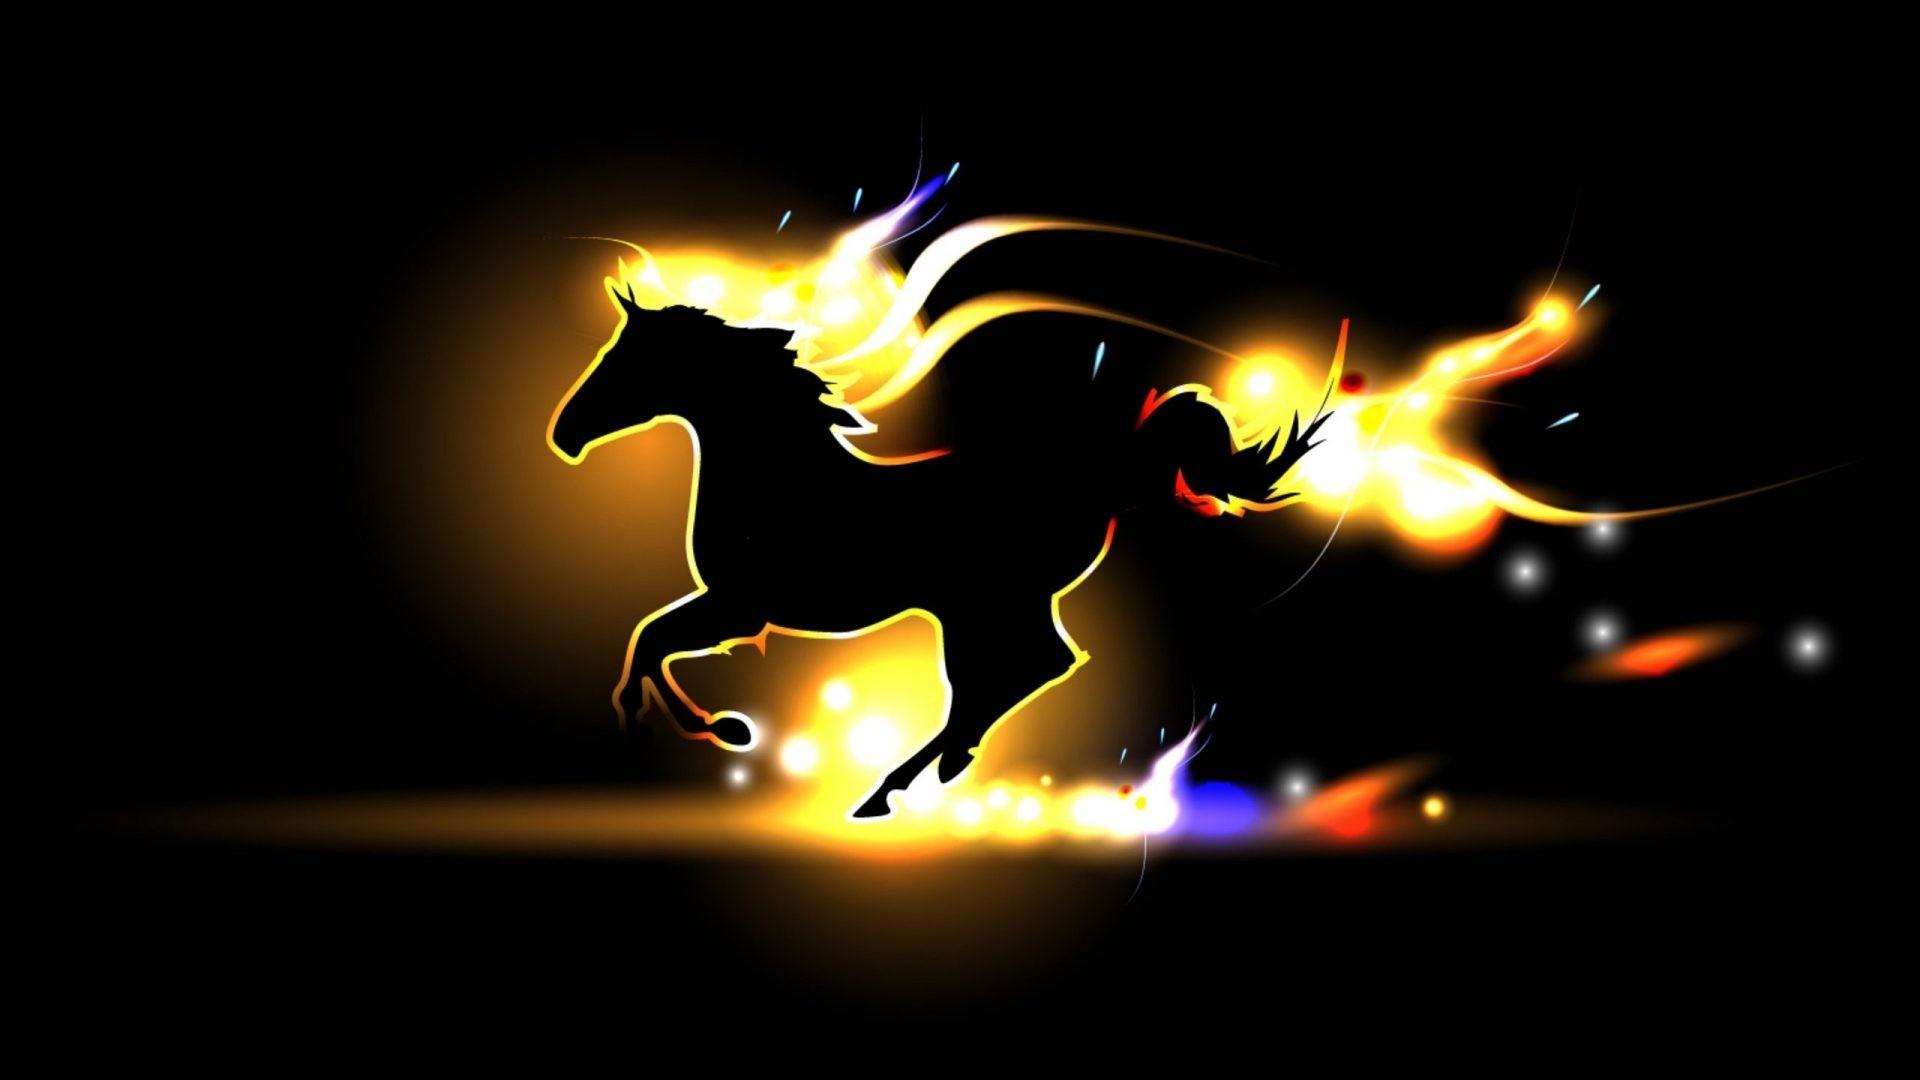 1920x1080 Colorful Lighter Flame - WallDevil Flame Wallpapers ...